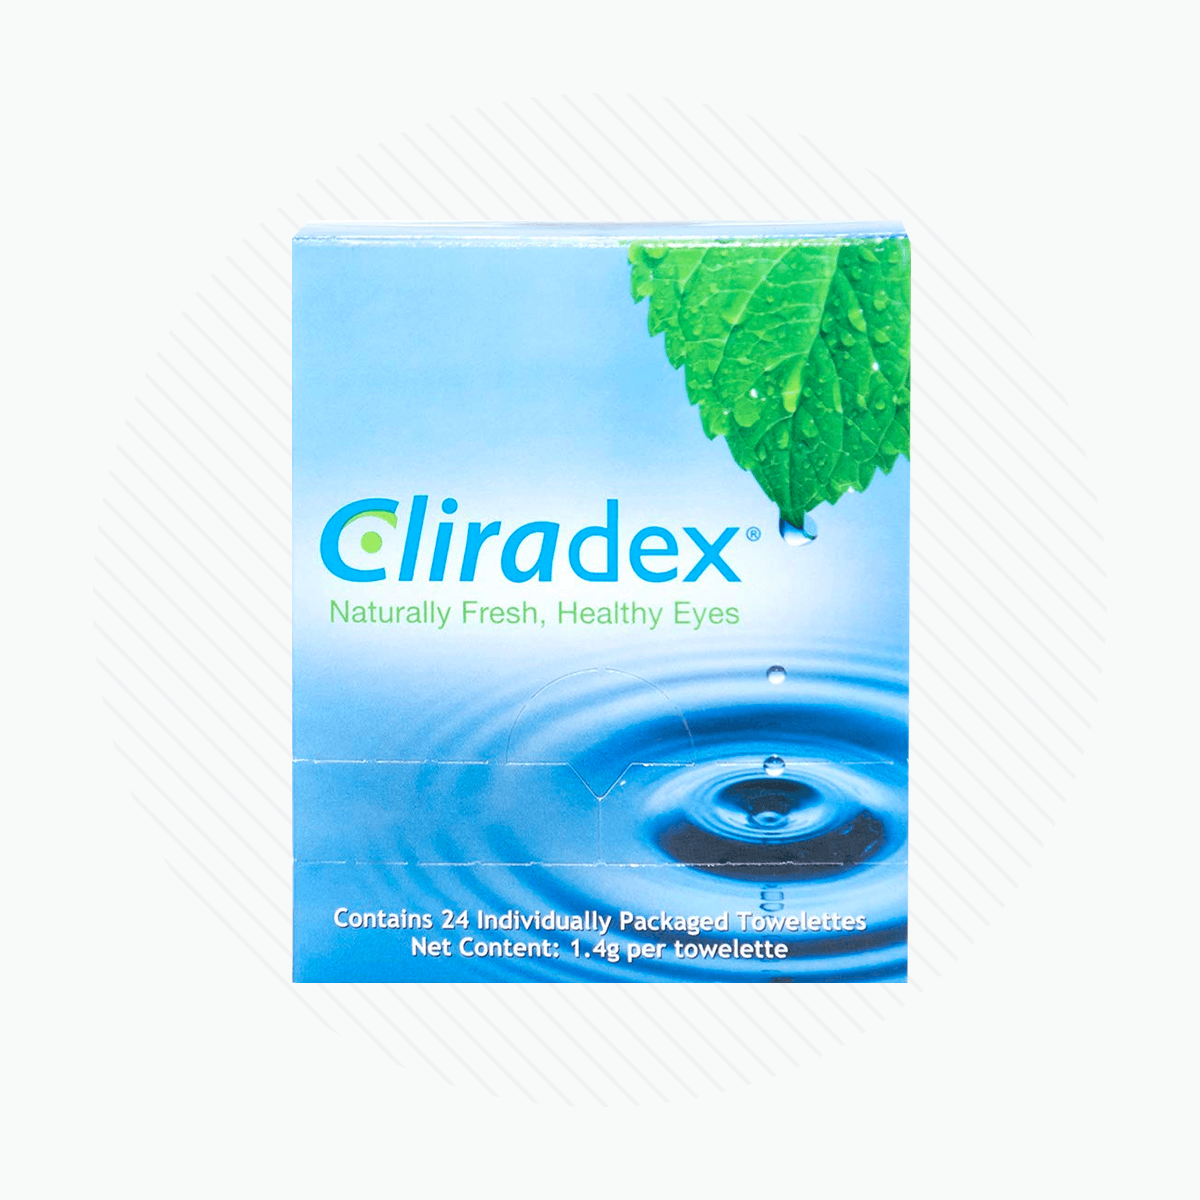 Cliradex Wipes - Tea Tree Oil Extract Eyelid Cleanser for Demodex, Blepharitis and Dry Eye- 20ct - DryEye Rescue Store